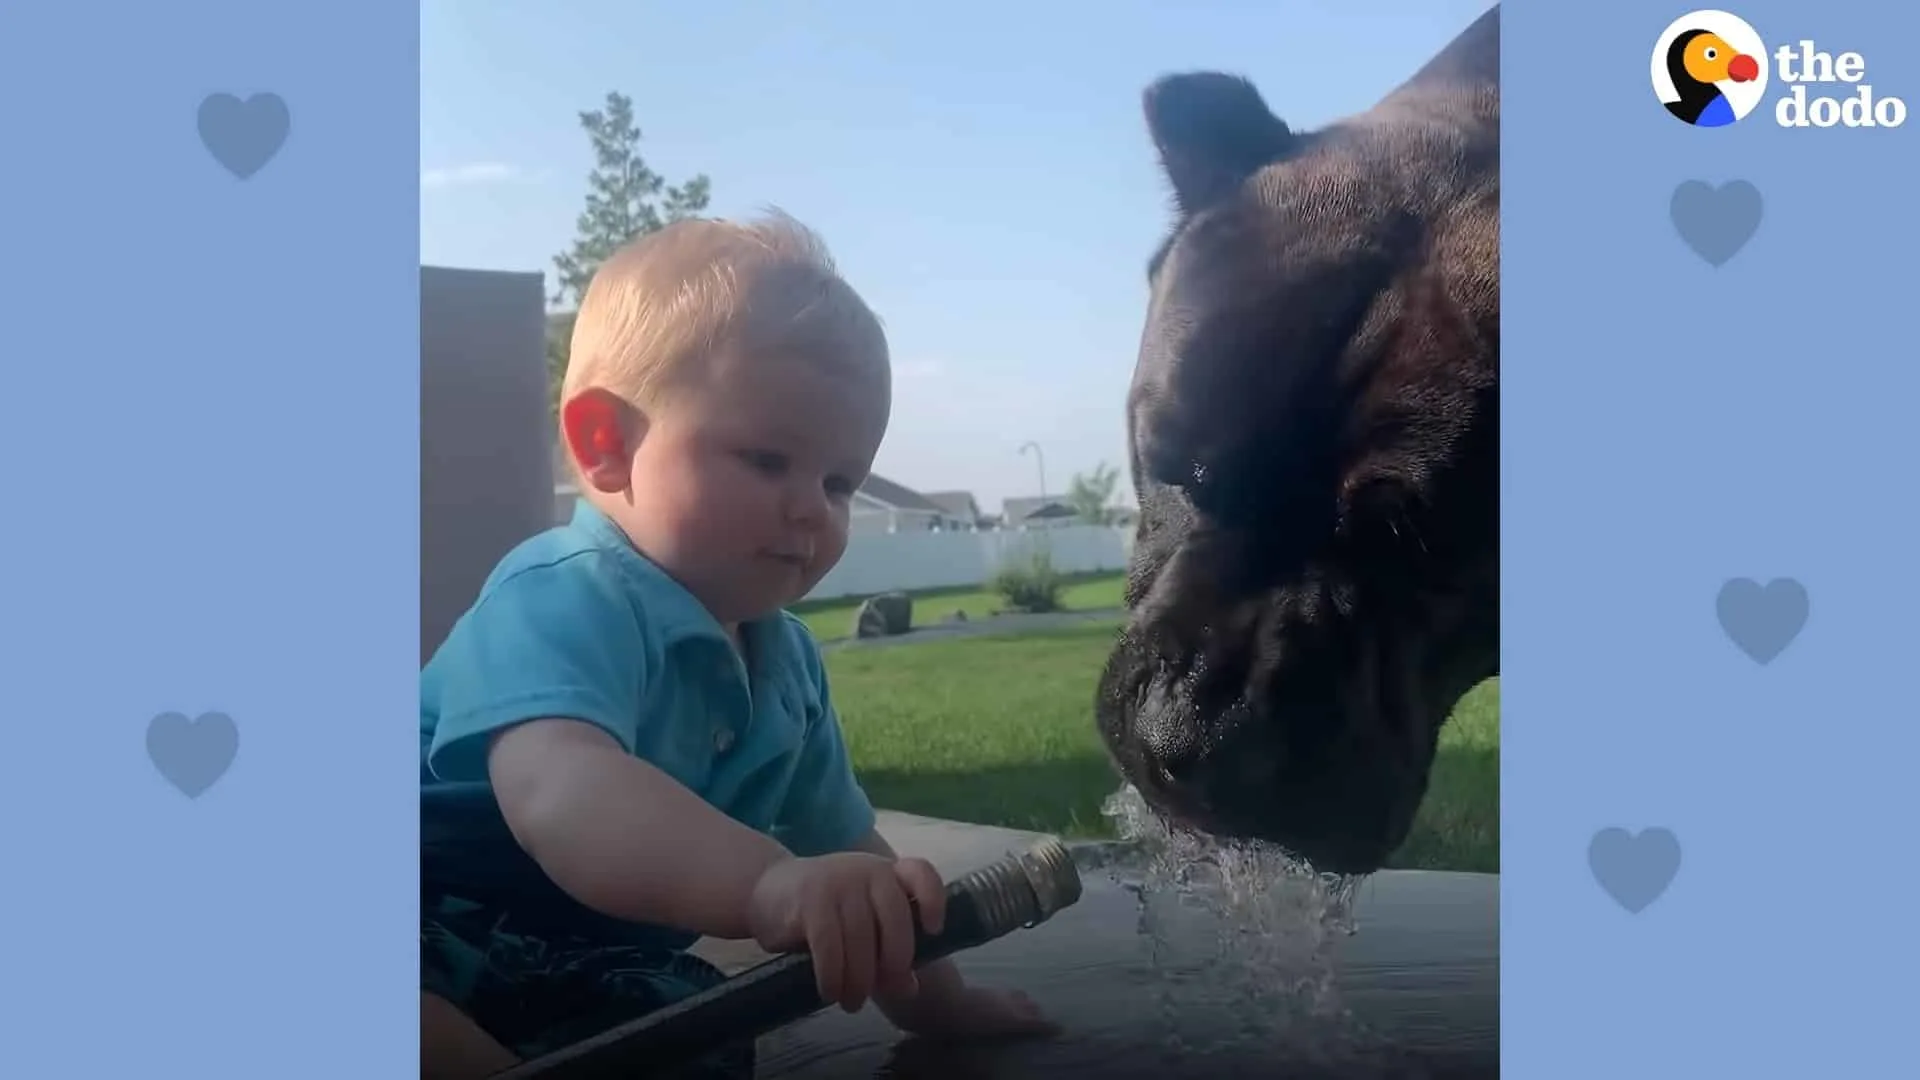 cane corso Drax drinks water that the baby pours